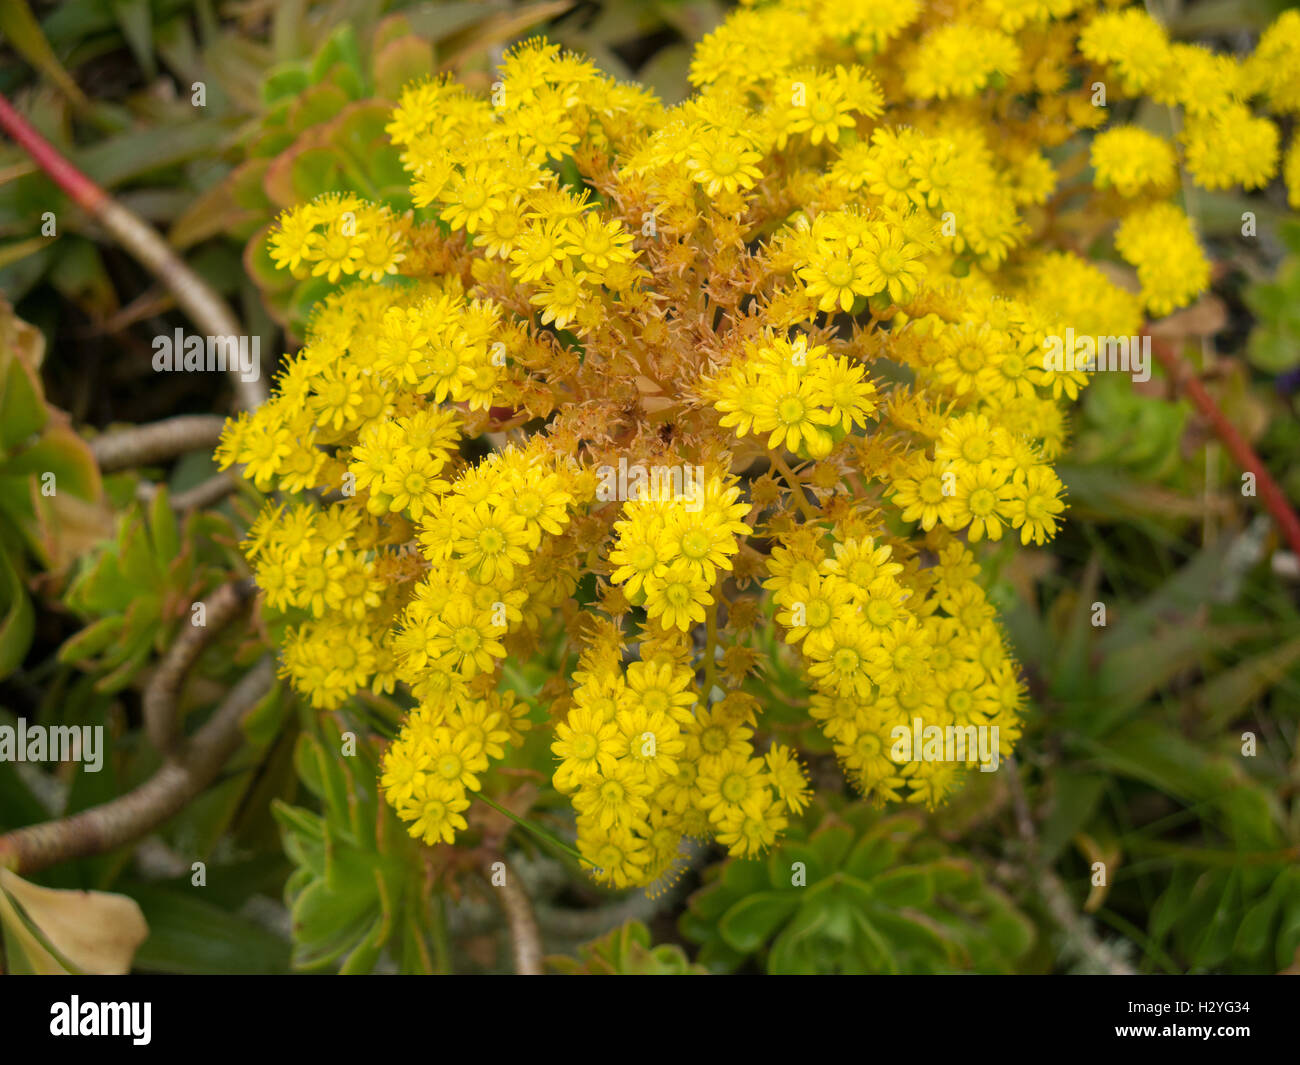 The Yellow Flower Head of an Aeonium arboreum (Houseleek Tree) on the Island of Tresco in the Isles of Scilly Stock Photo